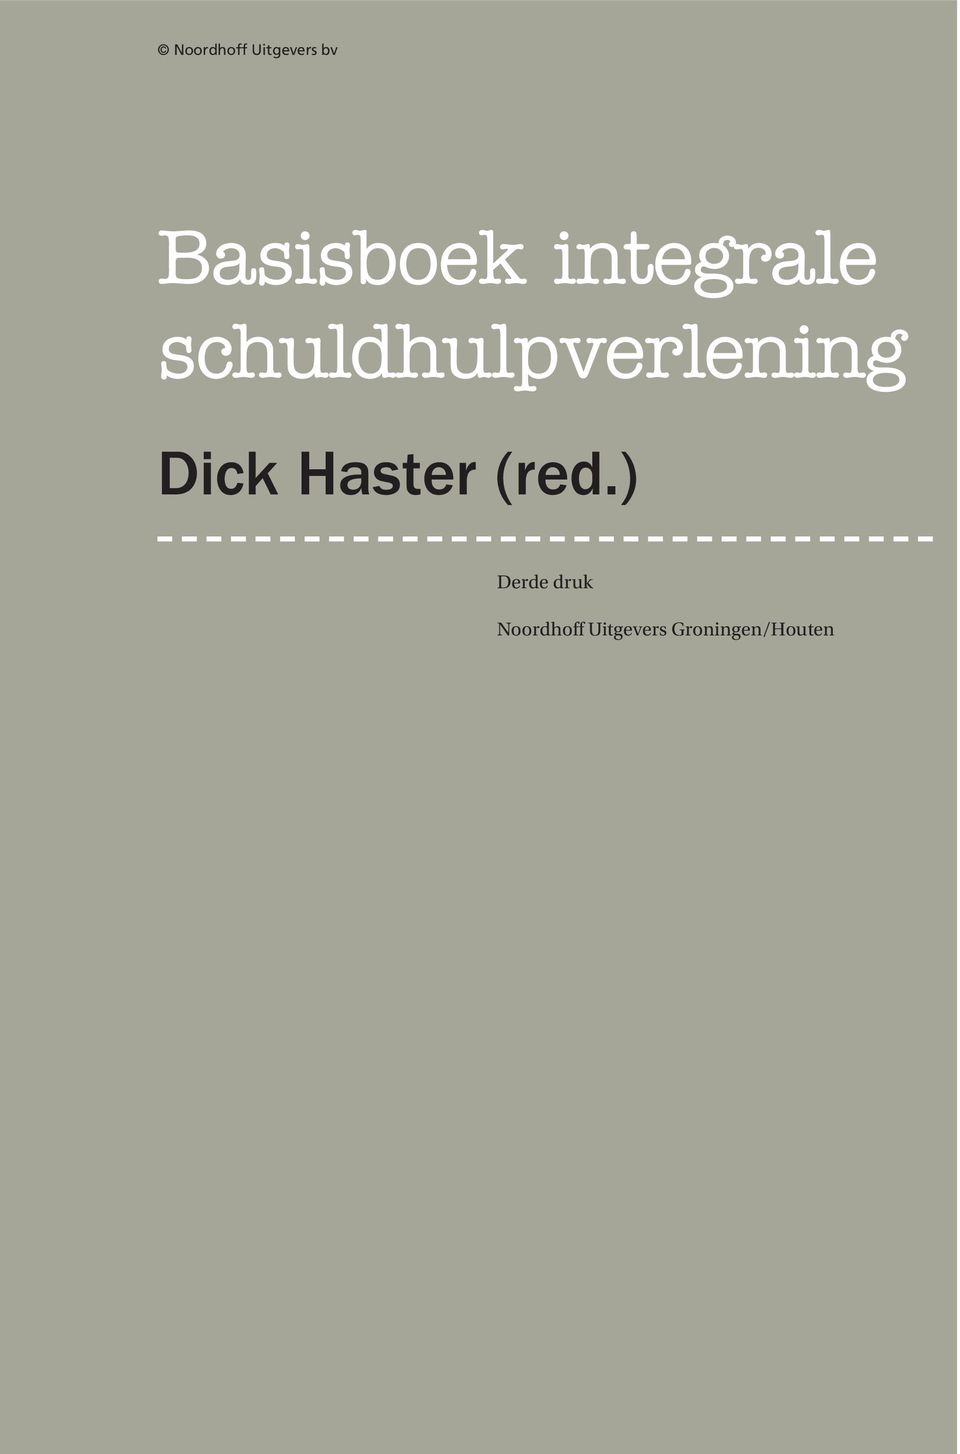 Dick Haster (red.